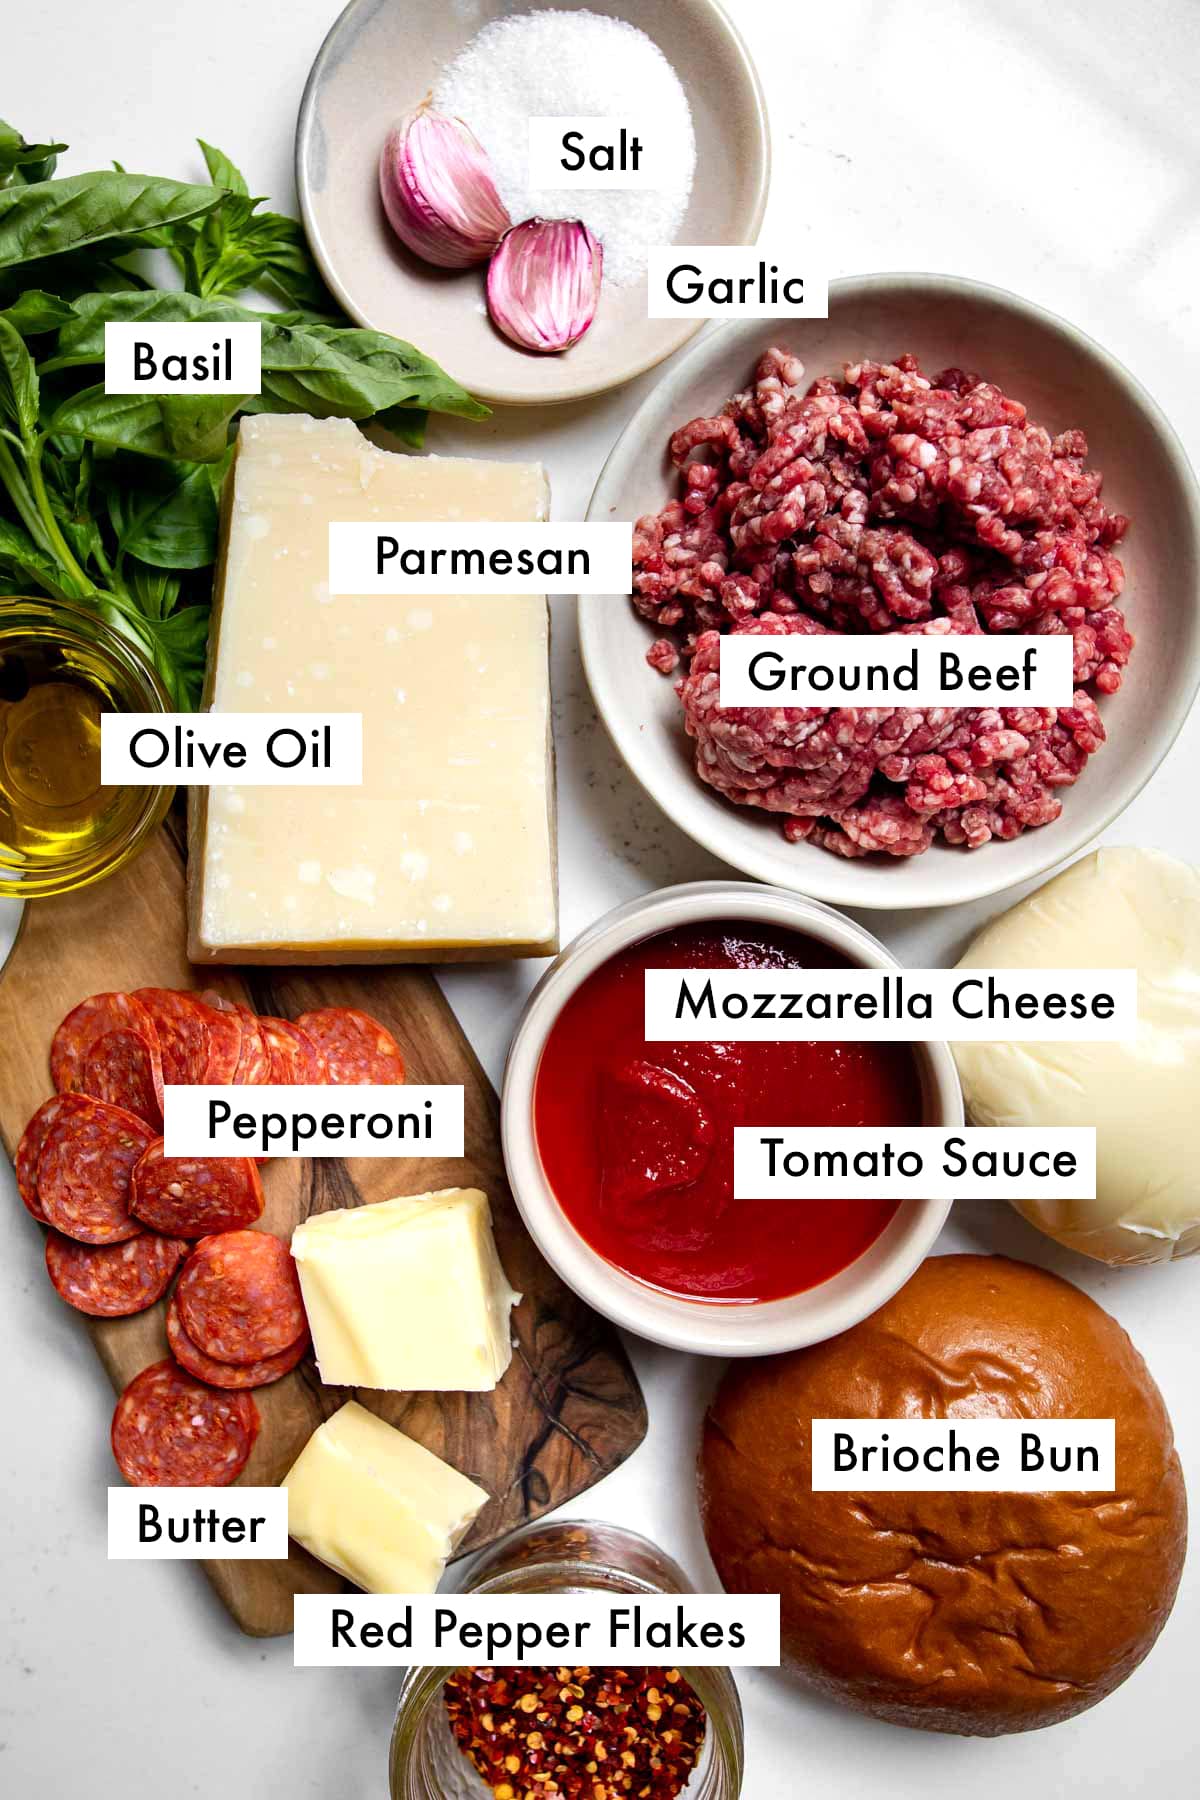 ingredients needed to make a pizza burger.